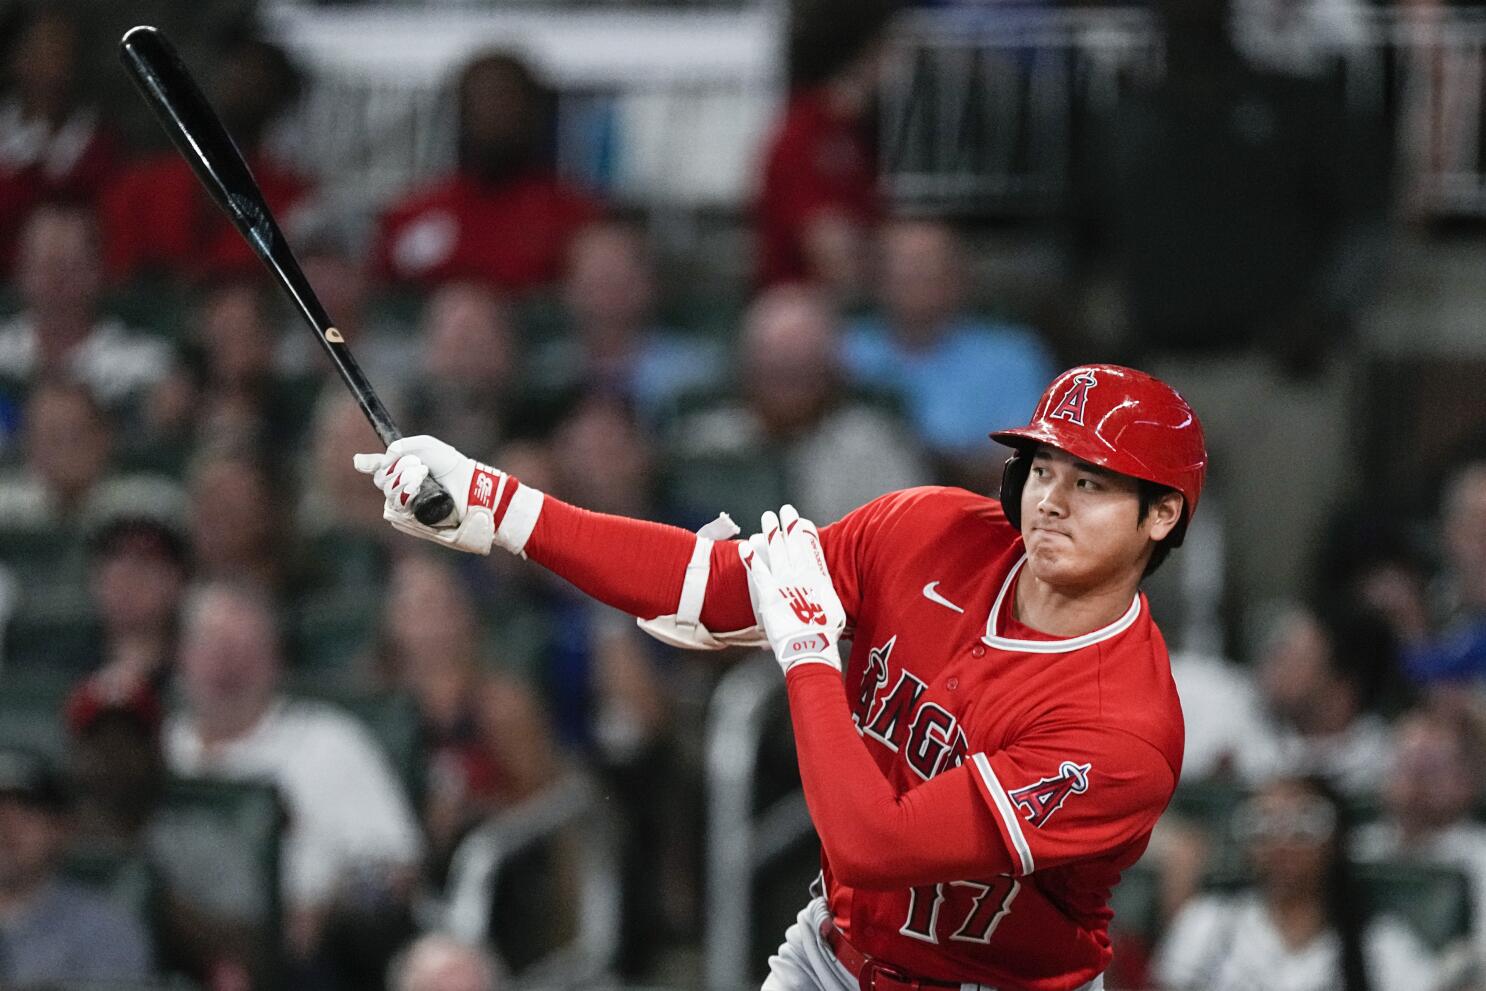 Angels use 3 solo homers to cool off MLB-leading Braves with 4-1 victory;  Ohtani goes 2 for 3 - ABC News